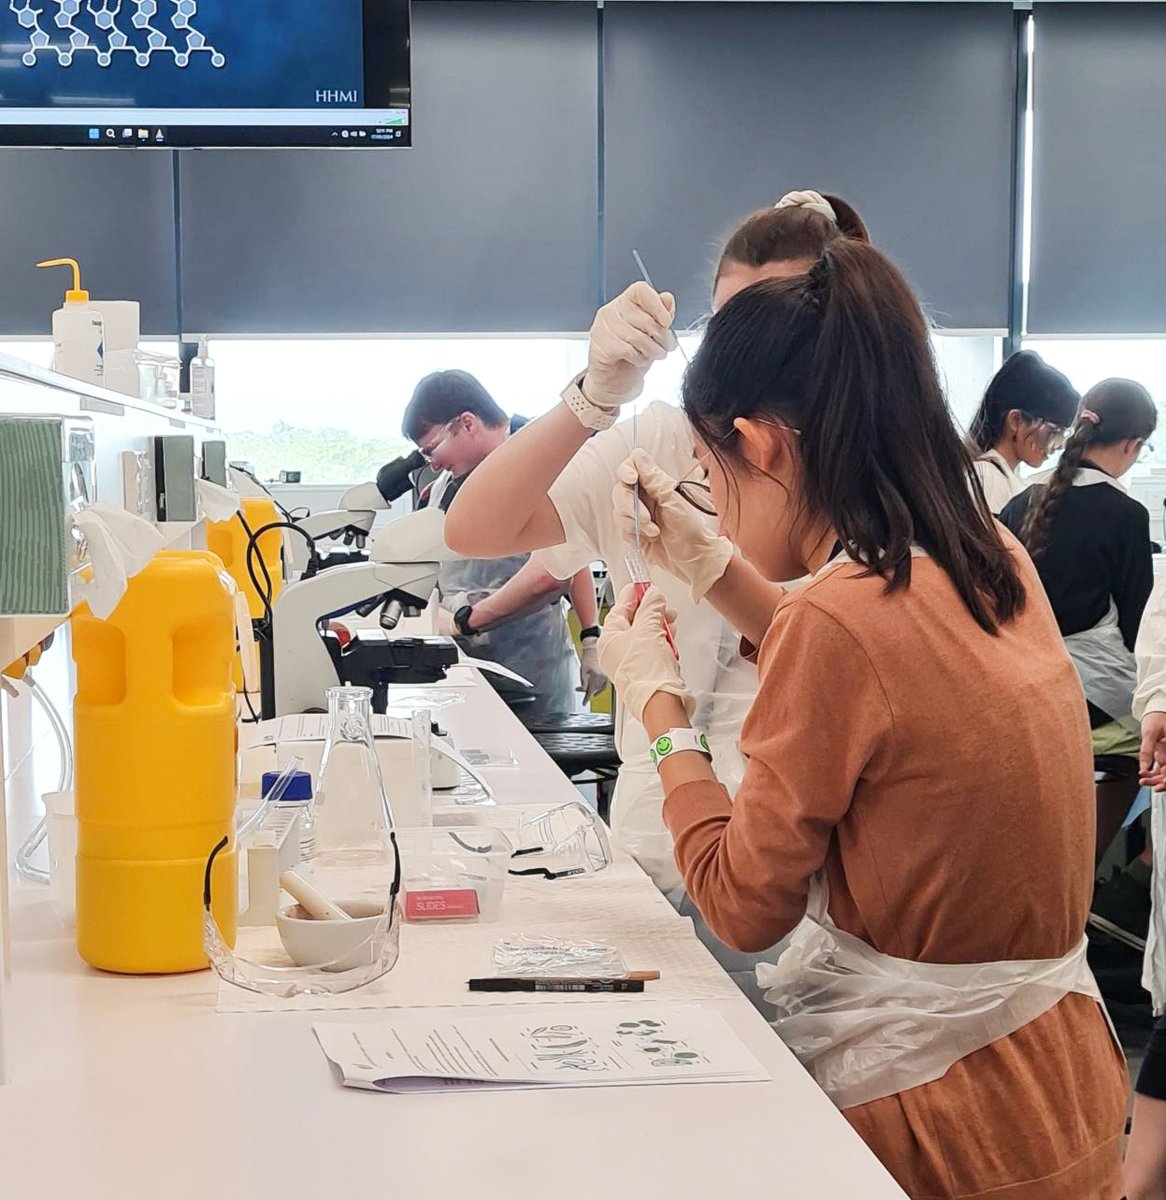 This week we welcomed students for National Youth Science Forum and The Science Experience. Activities, included: DNA matching and microscopy experiments, neuroscience and human anatomy, forensic identification, and physics experiments, Fourier analysis & dust trap demonstration.